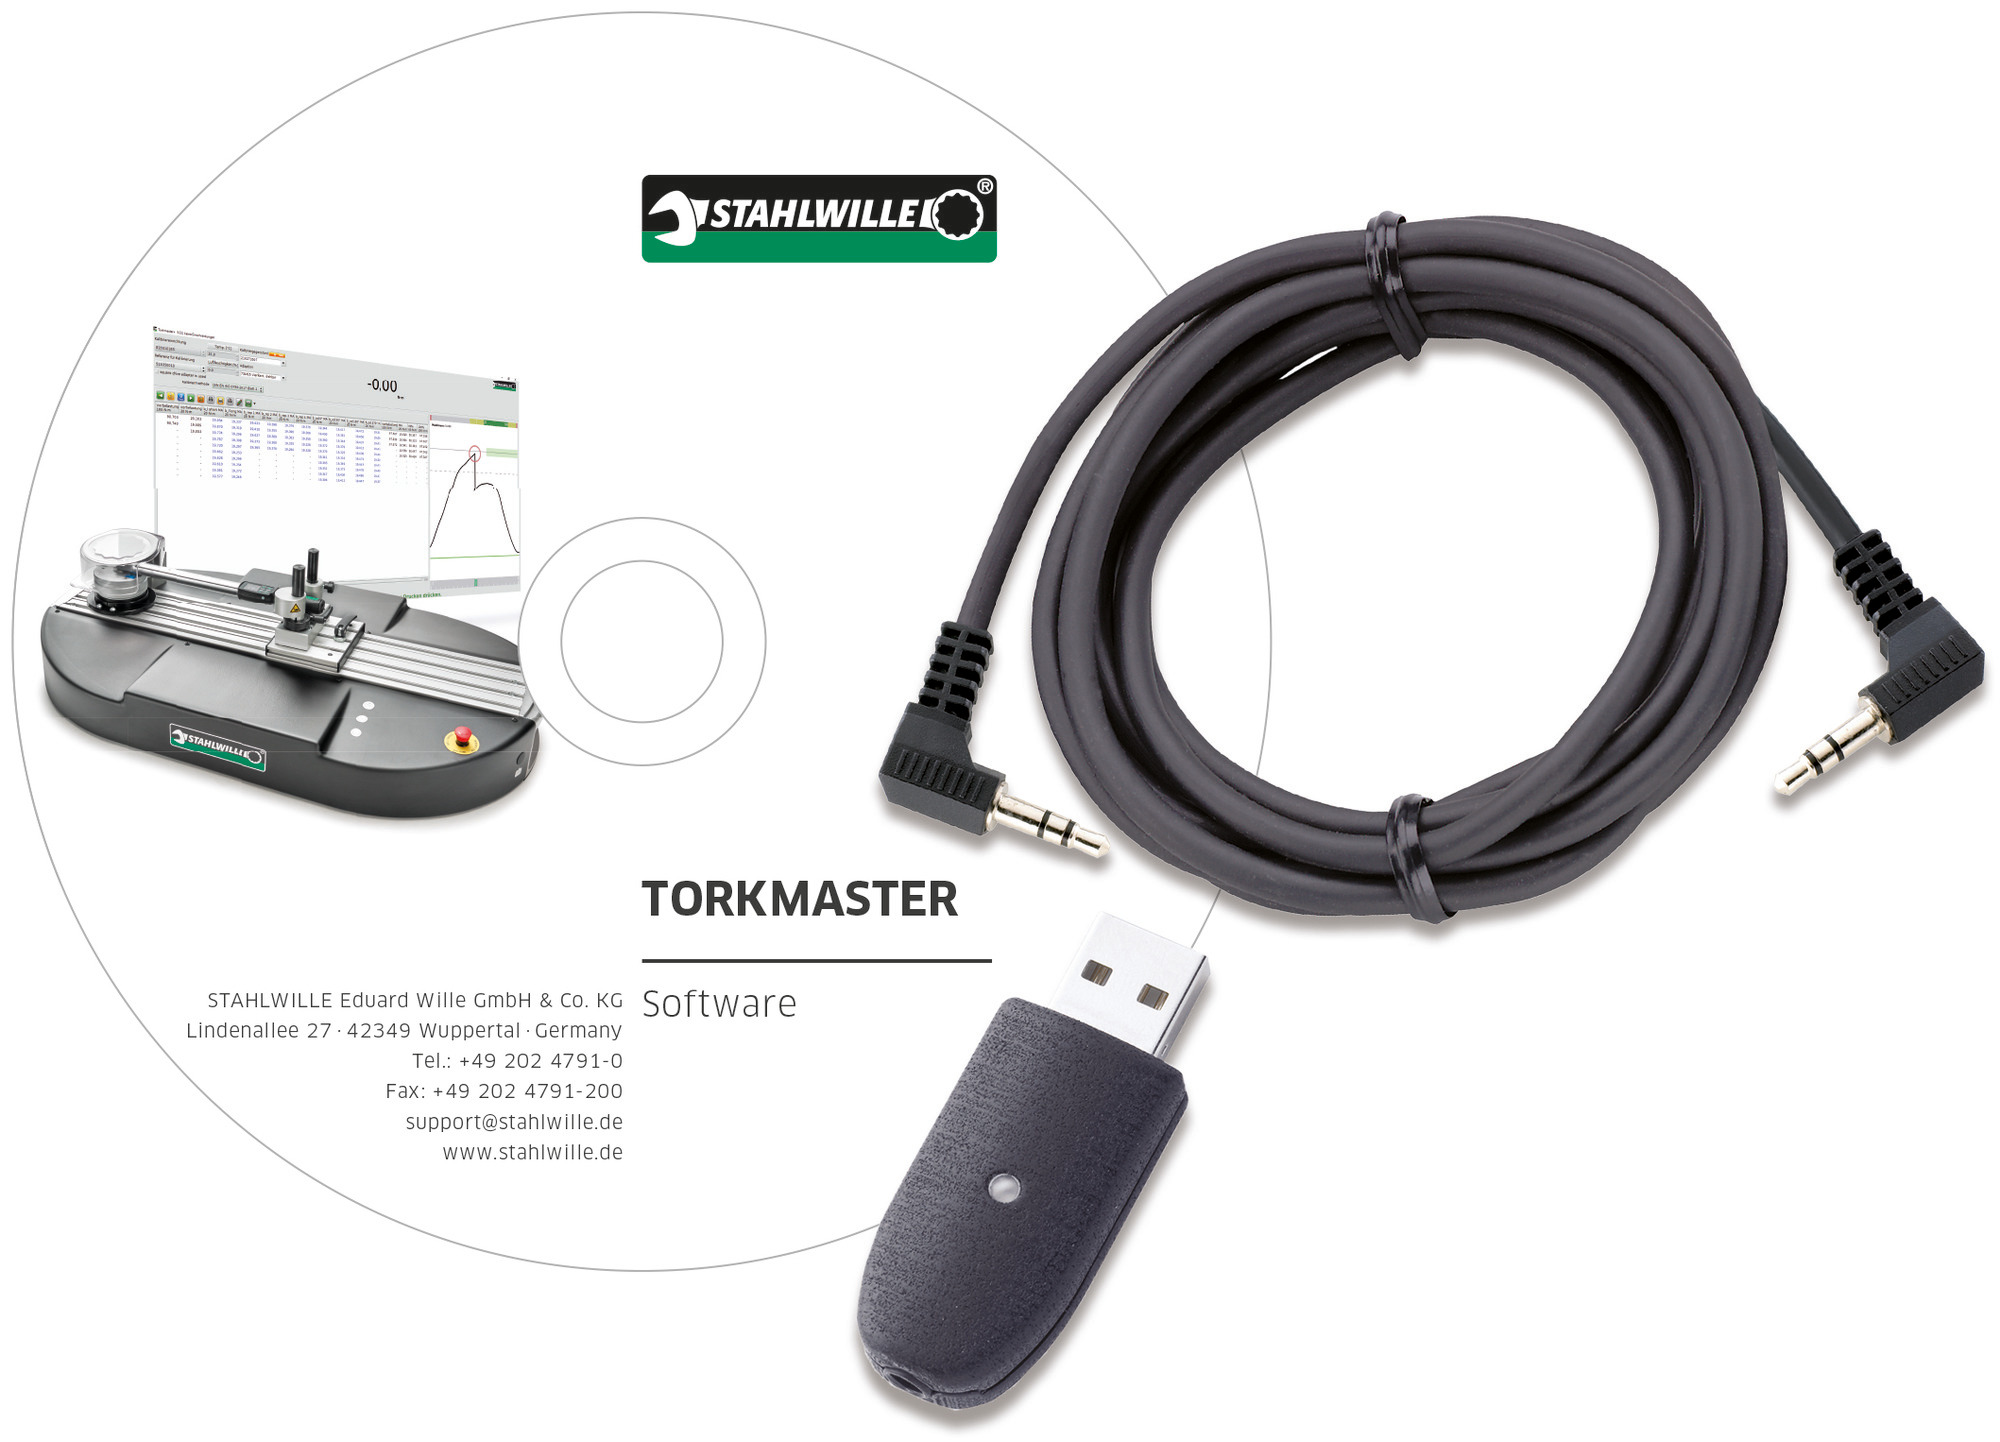 USB Adapter, Jack Cable and Torkmaster Software 7759-4